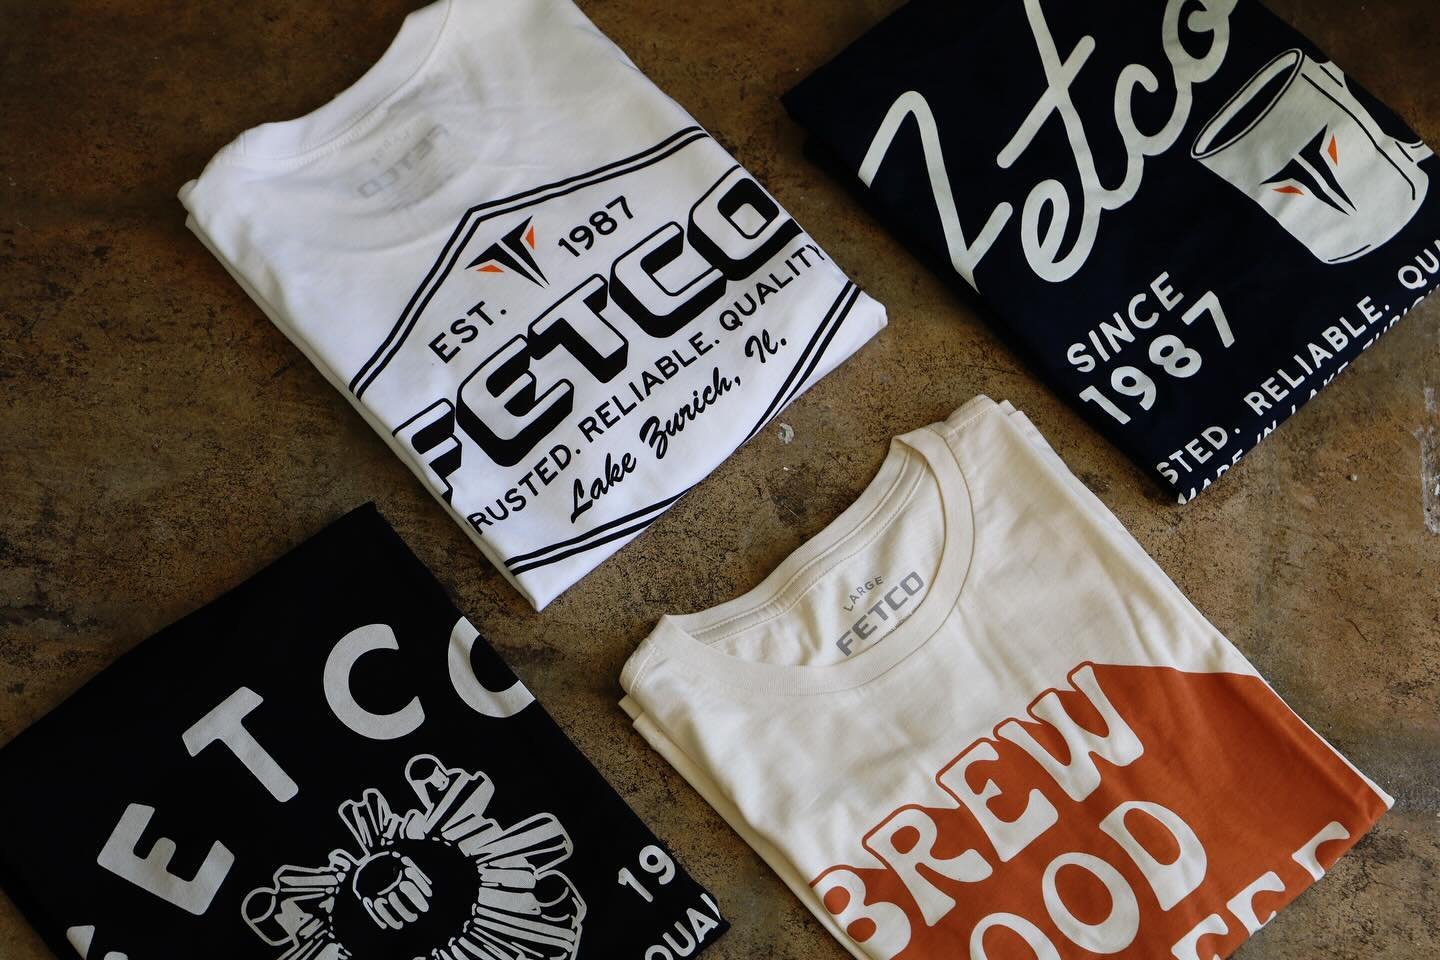 🔥 BIG NEWS! 🔥 We&rsquo;re super excited to announce the launch of FETCO&rsquo;s official online merch store! From tees to hats, sweatshirts, bandanas, and more, we&rsquo;ve got everything you need to rep FETCO in style. Visit fetco.com/shop or the 